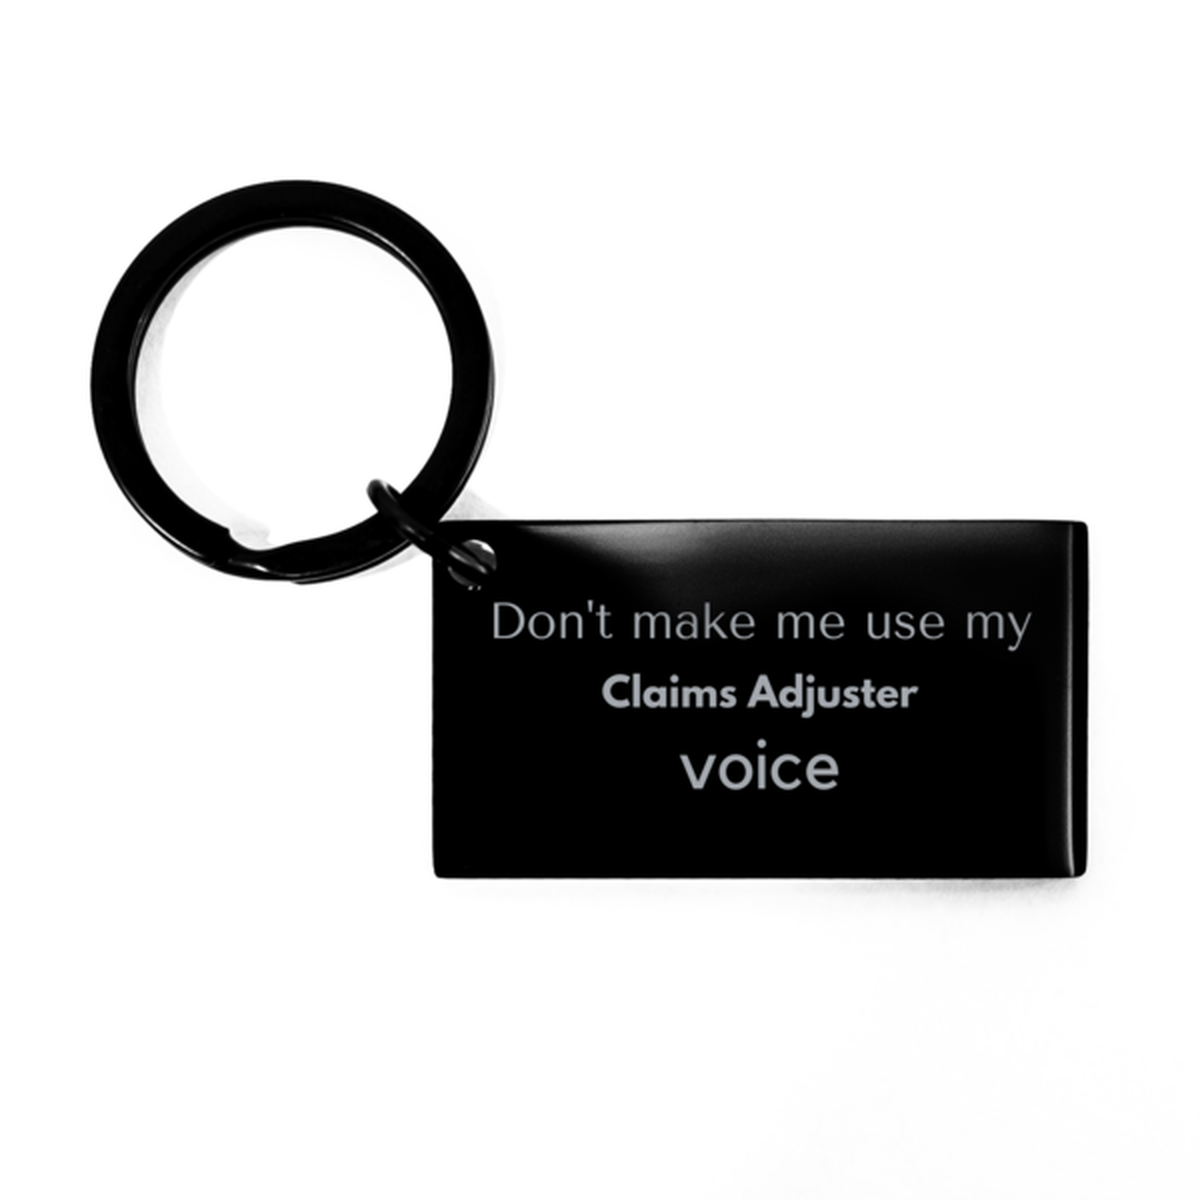 Don't make me use my Claims Adjuster voice, Sarcasm Claims Adjuster Gifts, Christmas Claims Adjuster Keychain Birthday Unique Gifts For Claims Adjuster Coworkers, Men, Women, Colleague, Friends